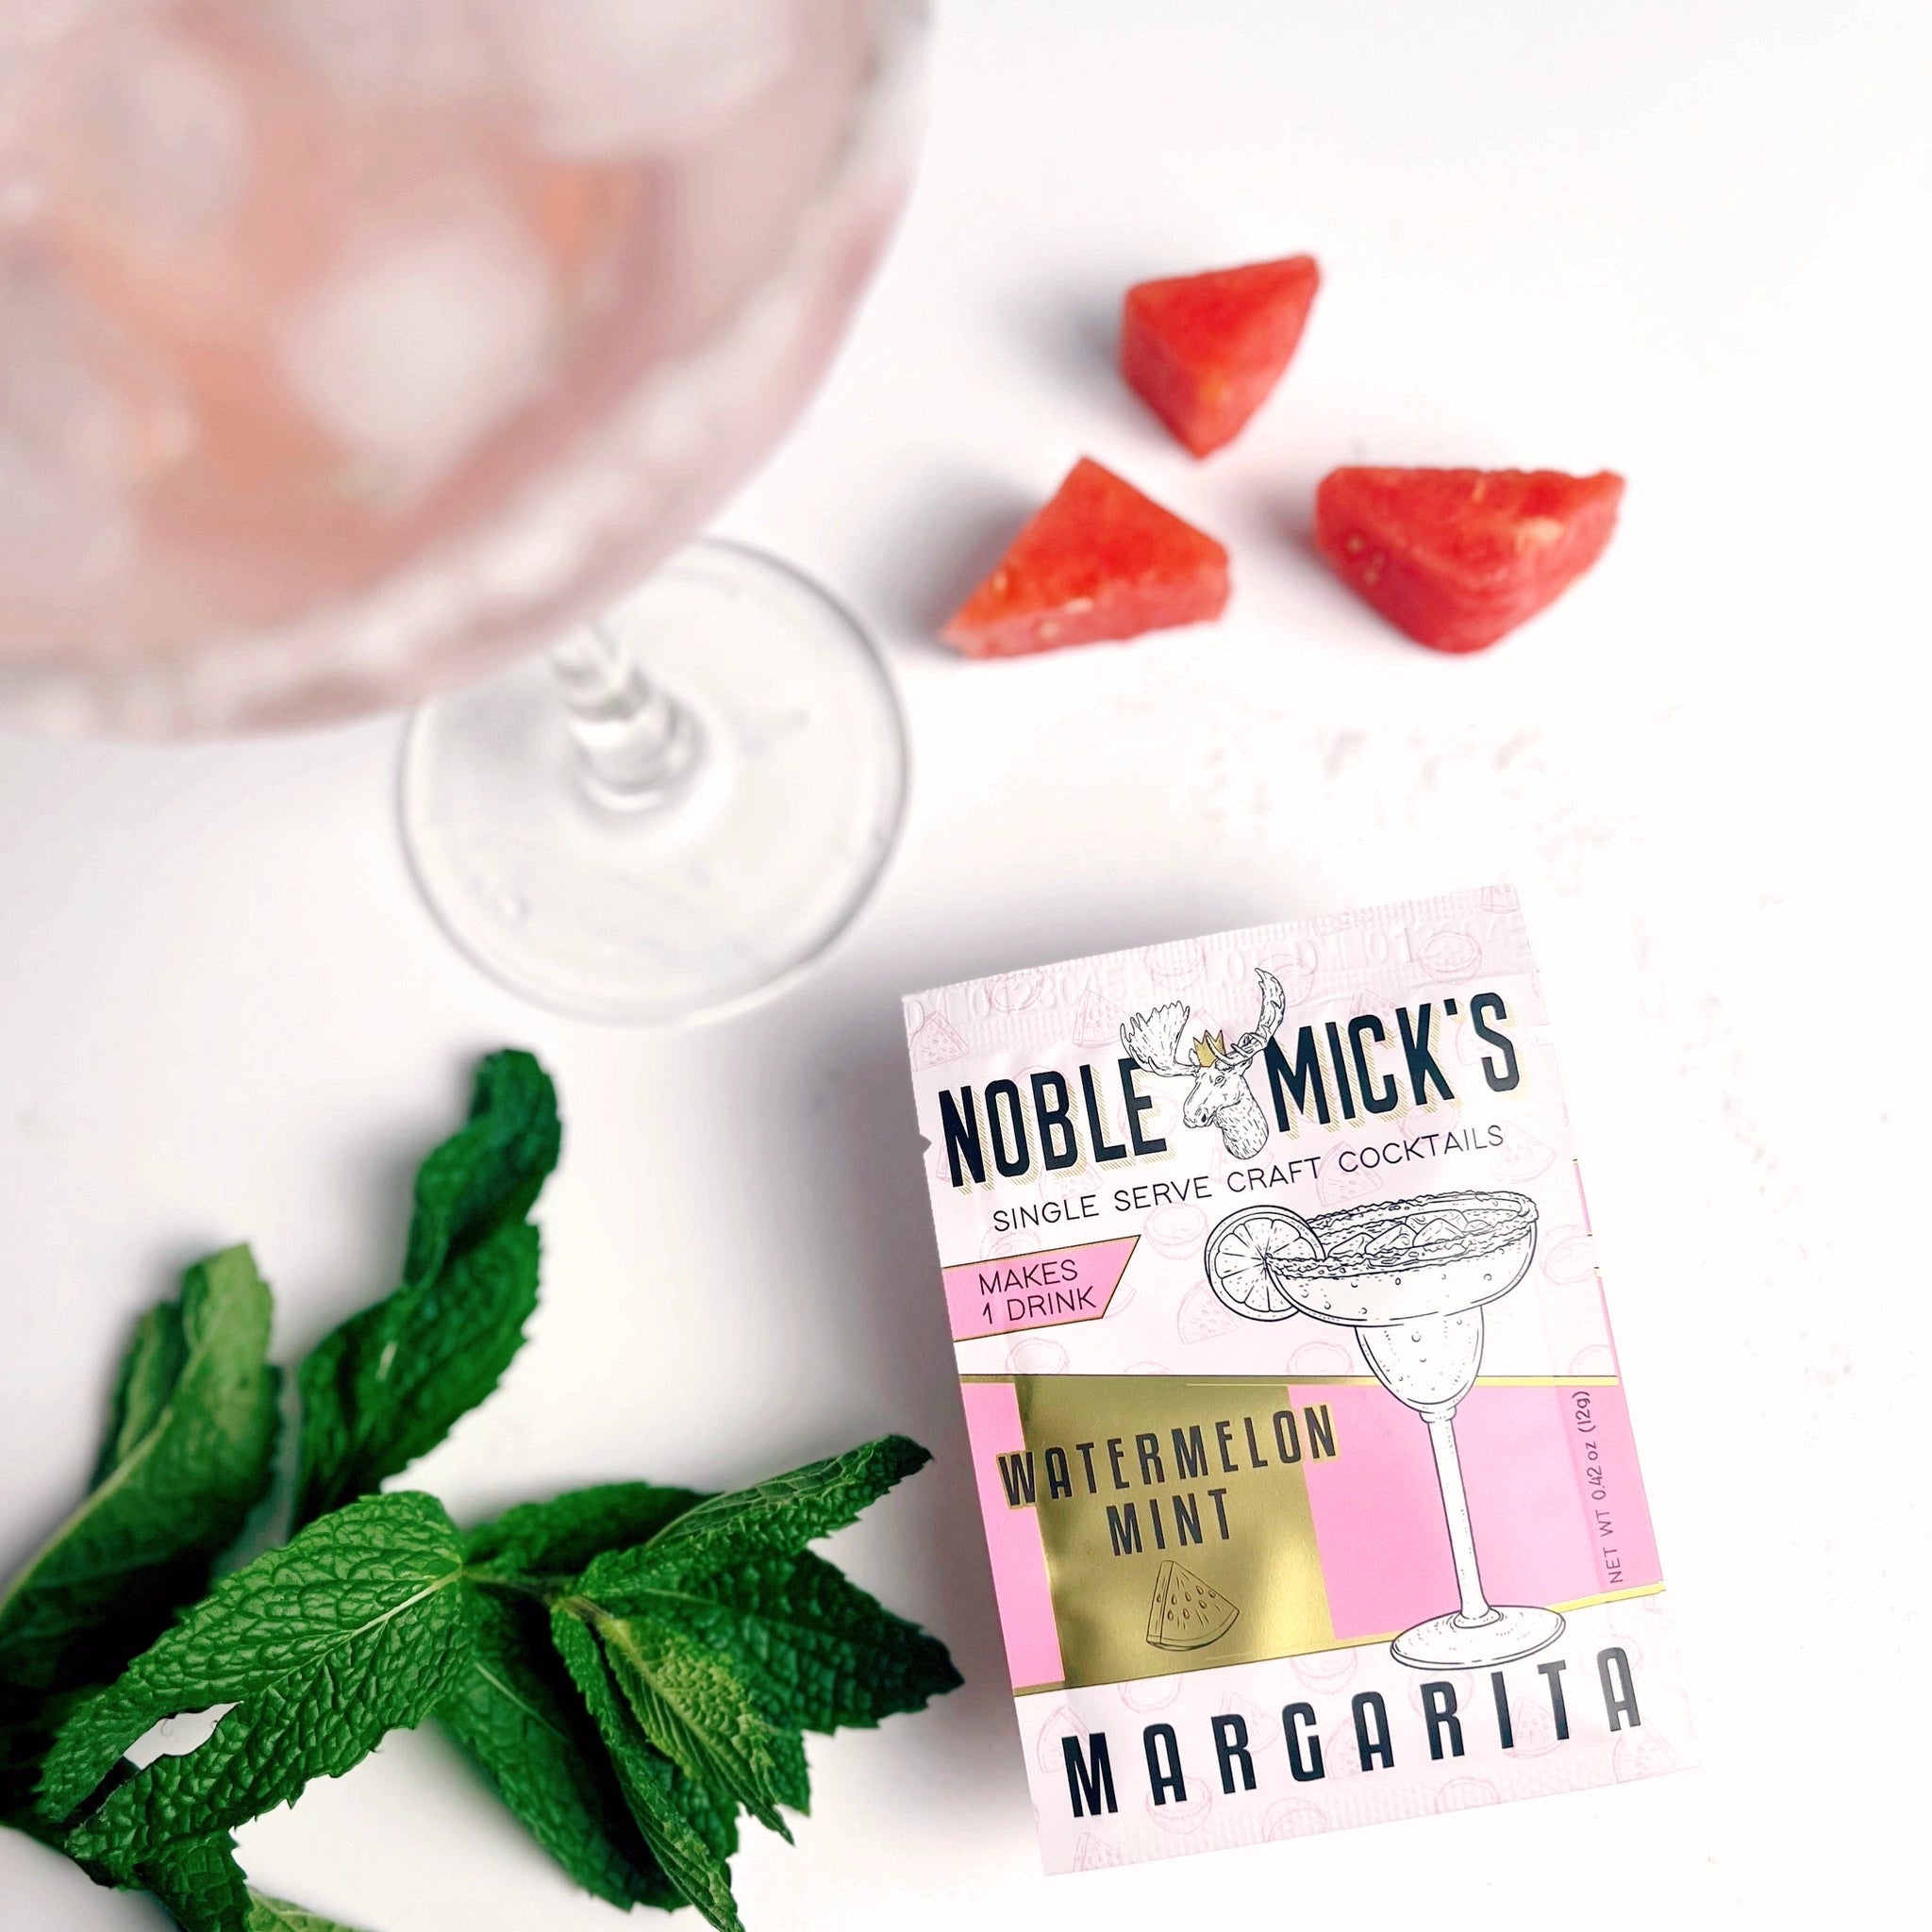 On a white background is a packet of cocktail mix in a white and hot pink packaging that has an illustration of a margarita glass along with black text that reads, &quot;Noble Micks Single Serve Craft Cocktails, Watermelon Mint Margarita&quot; photographed next to a couple slices of watermelon, mint and a cocktail glass with pink liquid inside. 